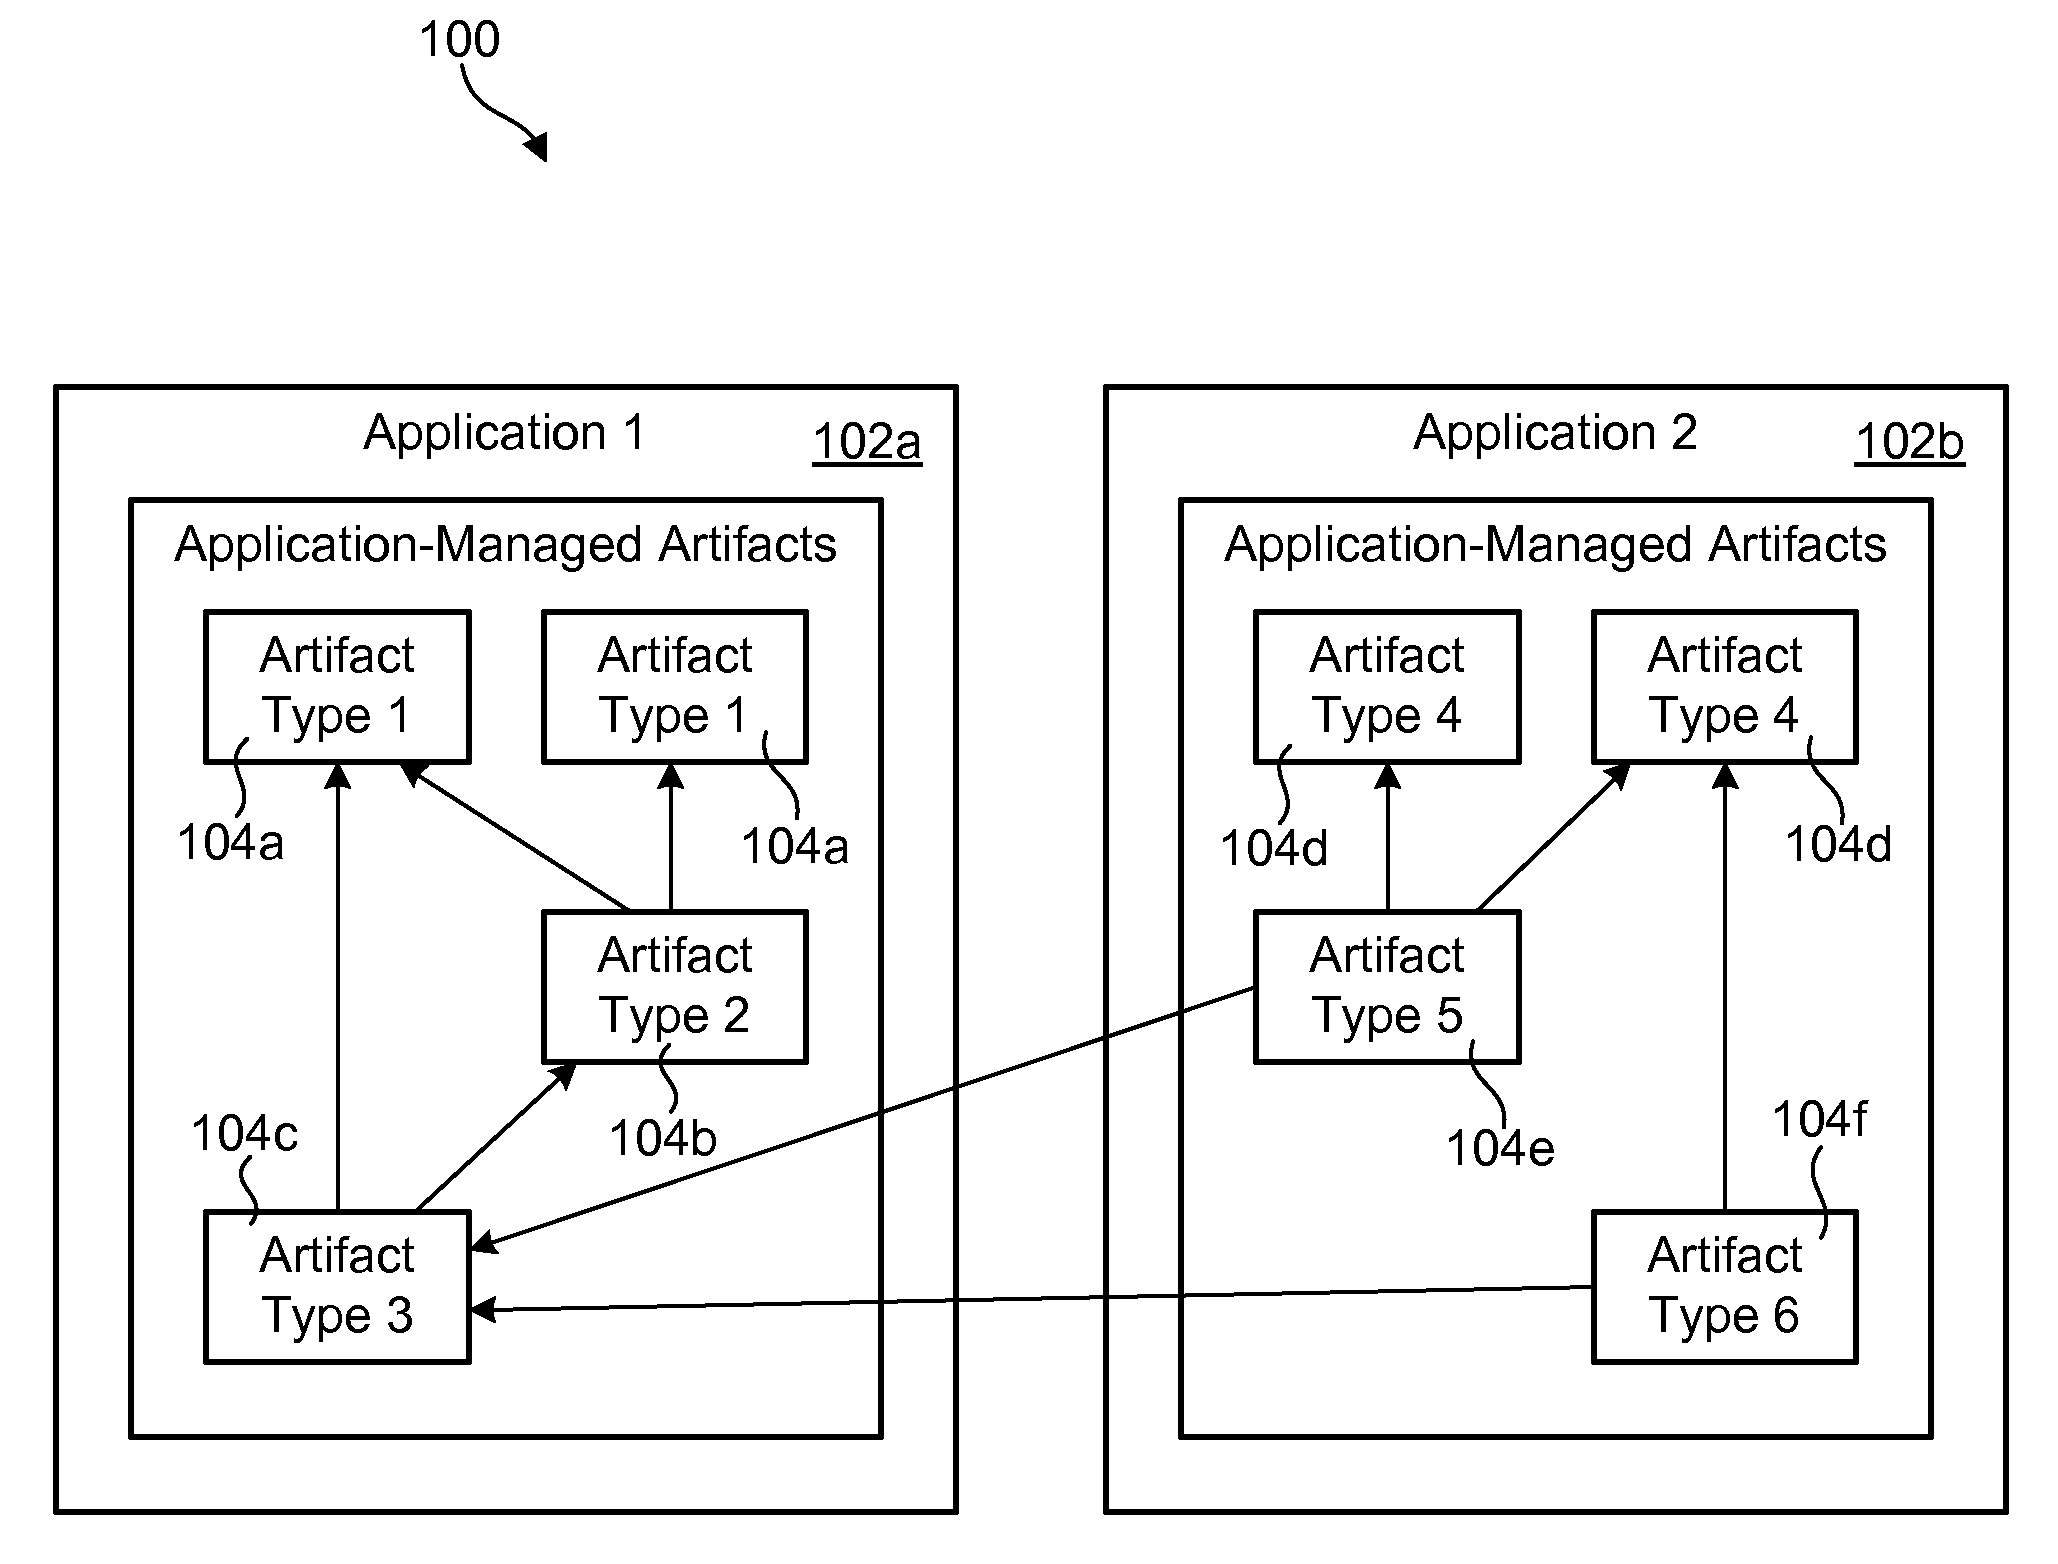 Cross-product refactoring apparatus and method